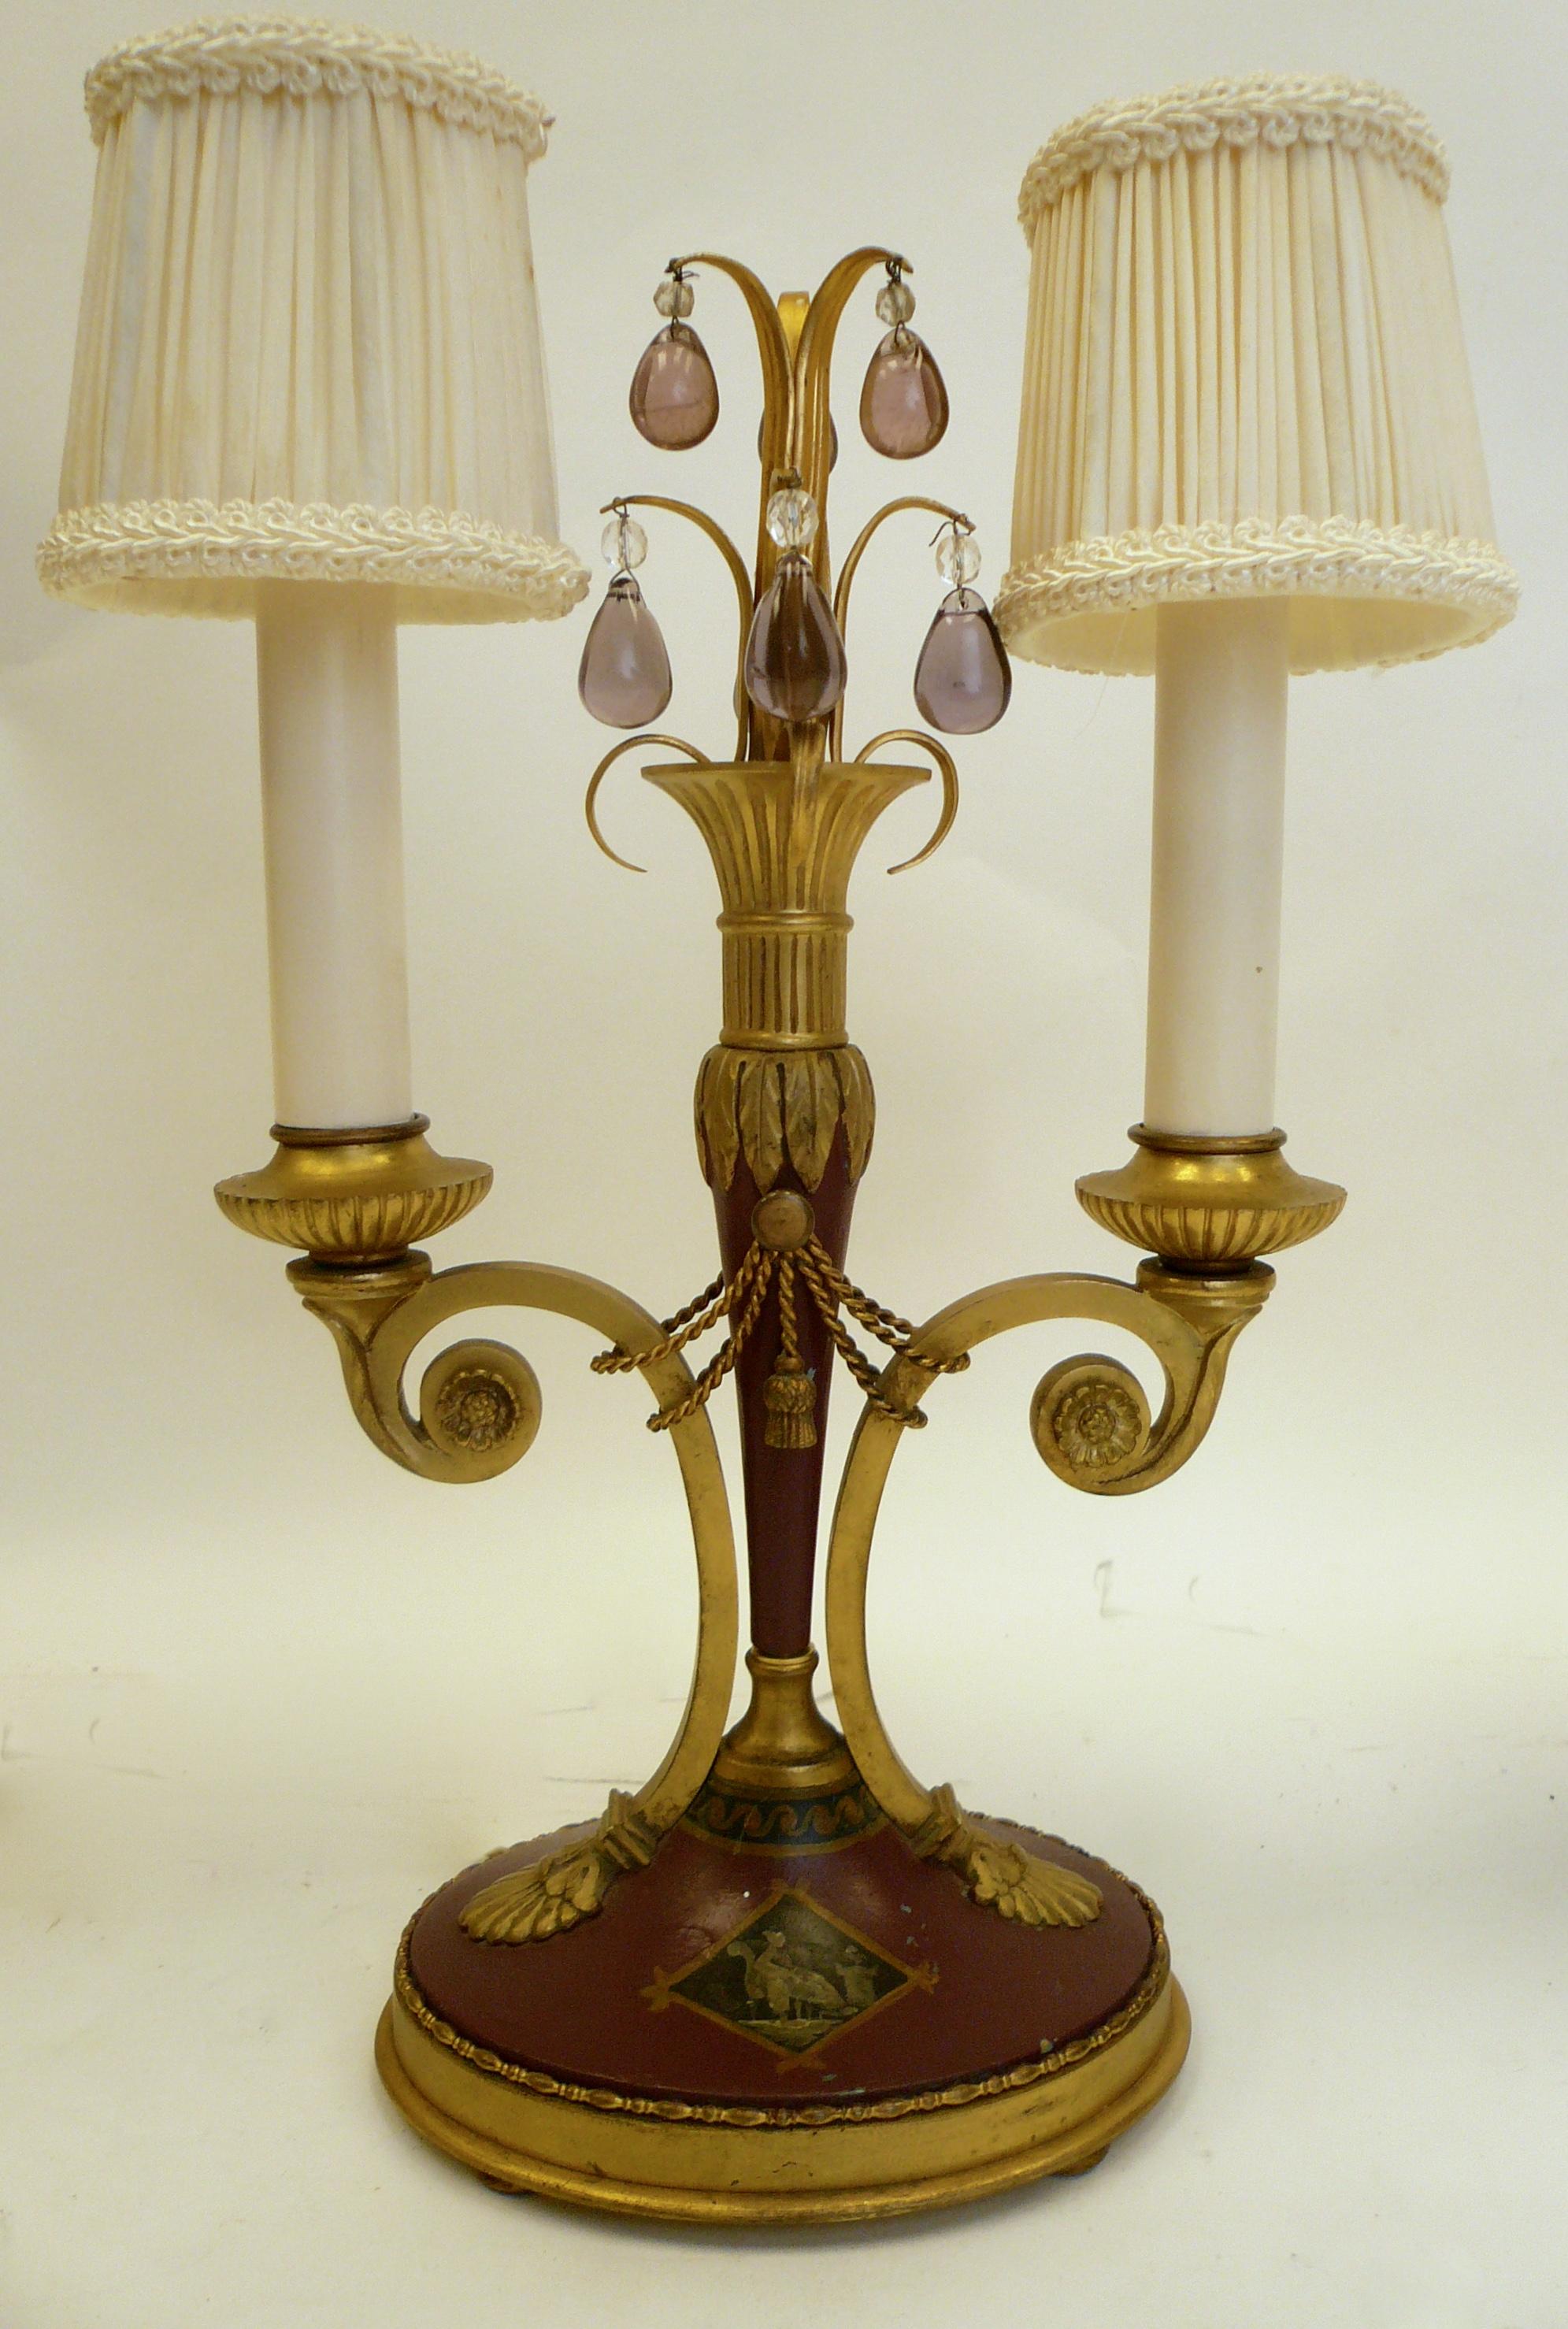 19th Century Pair of Directoire Style Gilt Bronze and Tole Painted Candelabra Lamps